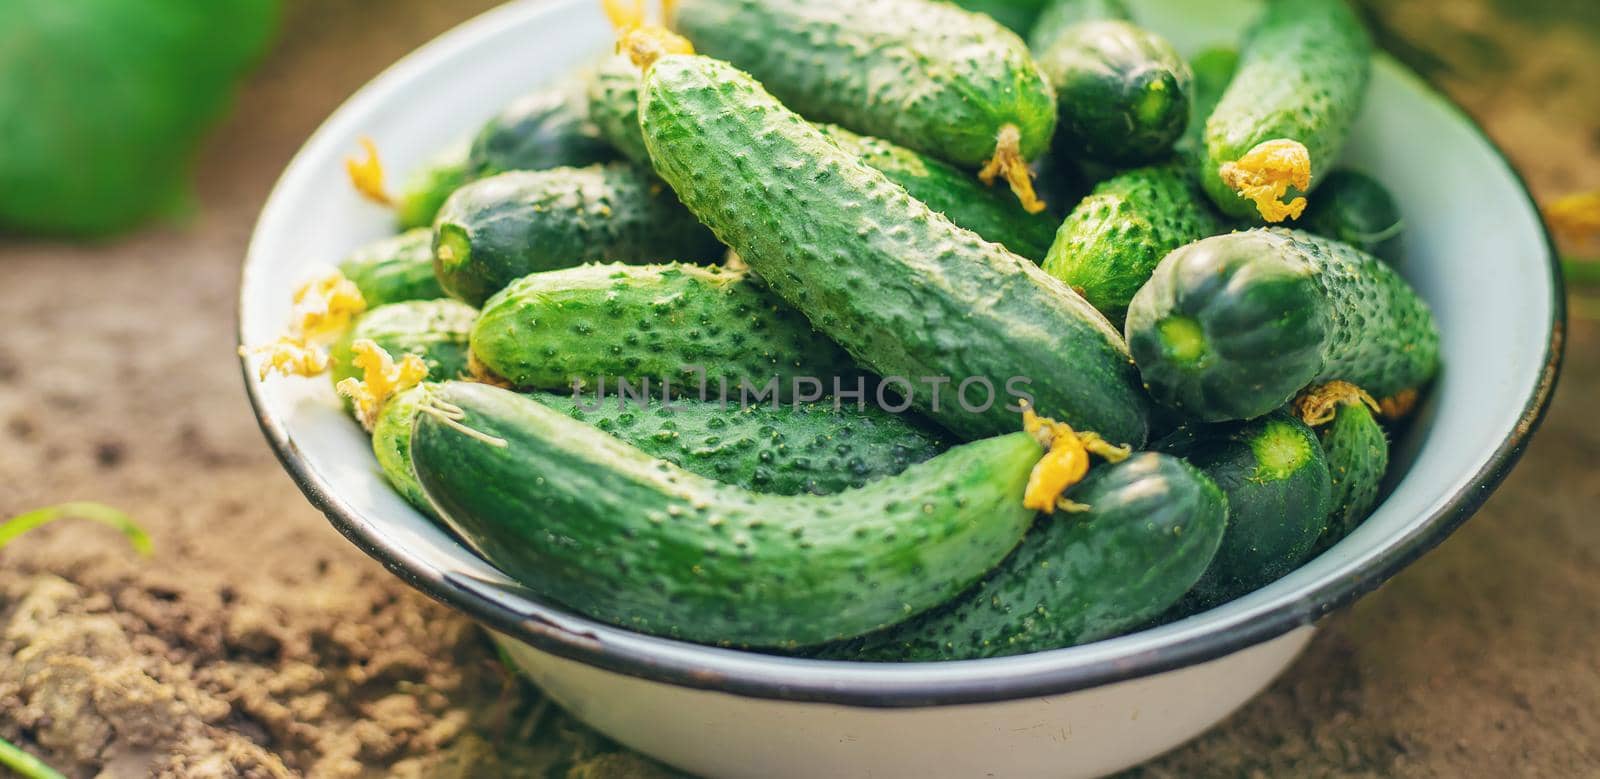 Harvesting homemade cucumbers. Selective focus. nature. food by mila1784